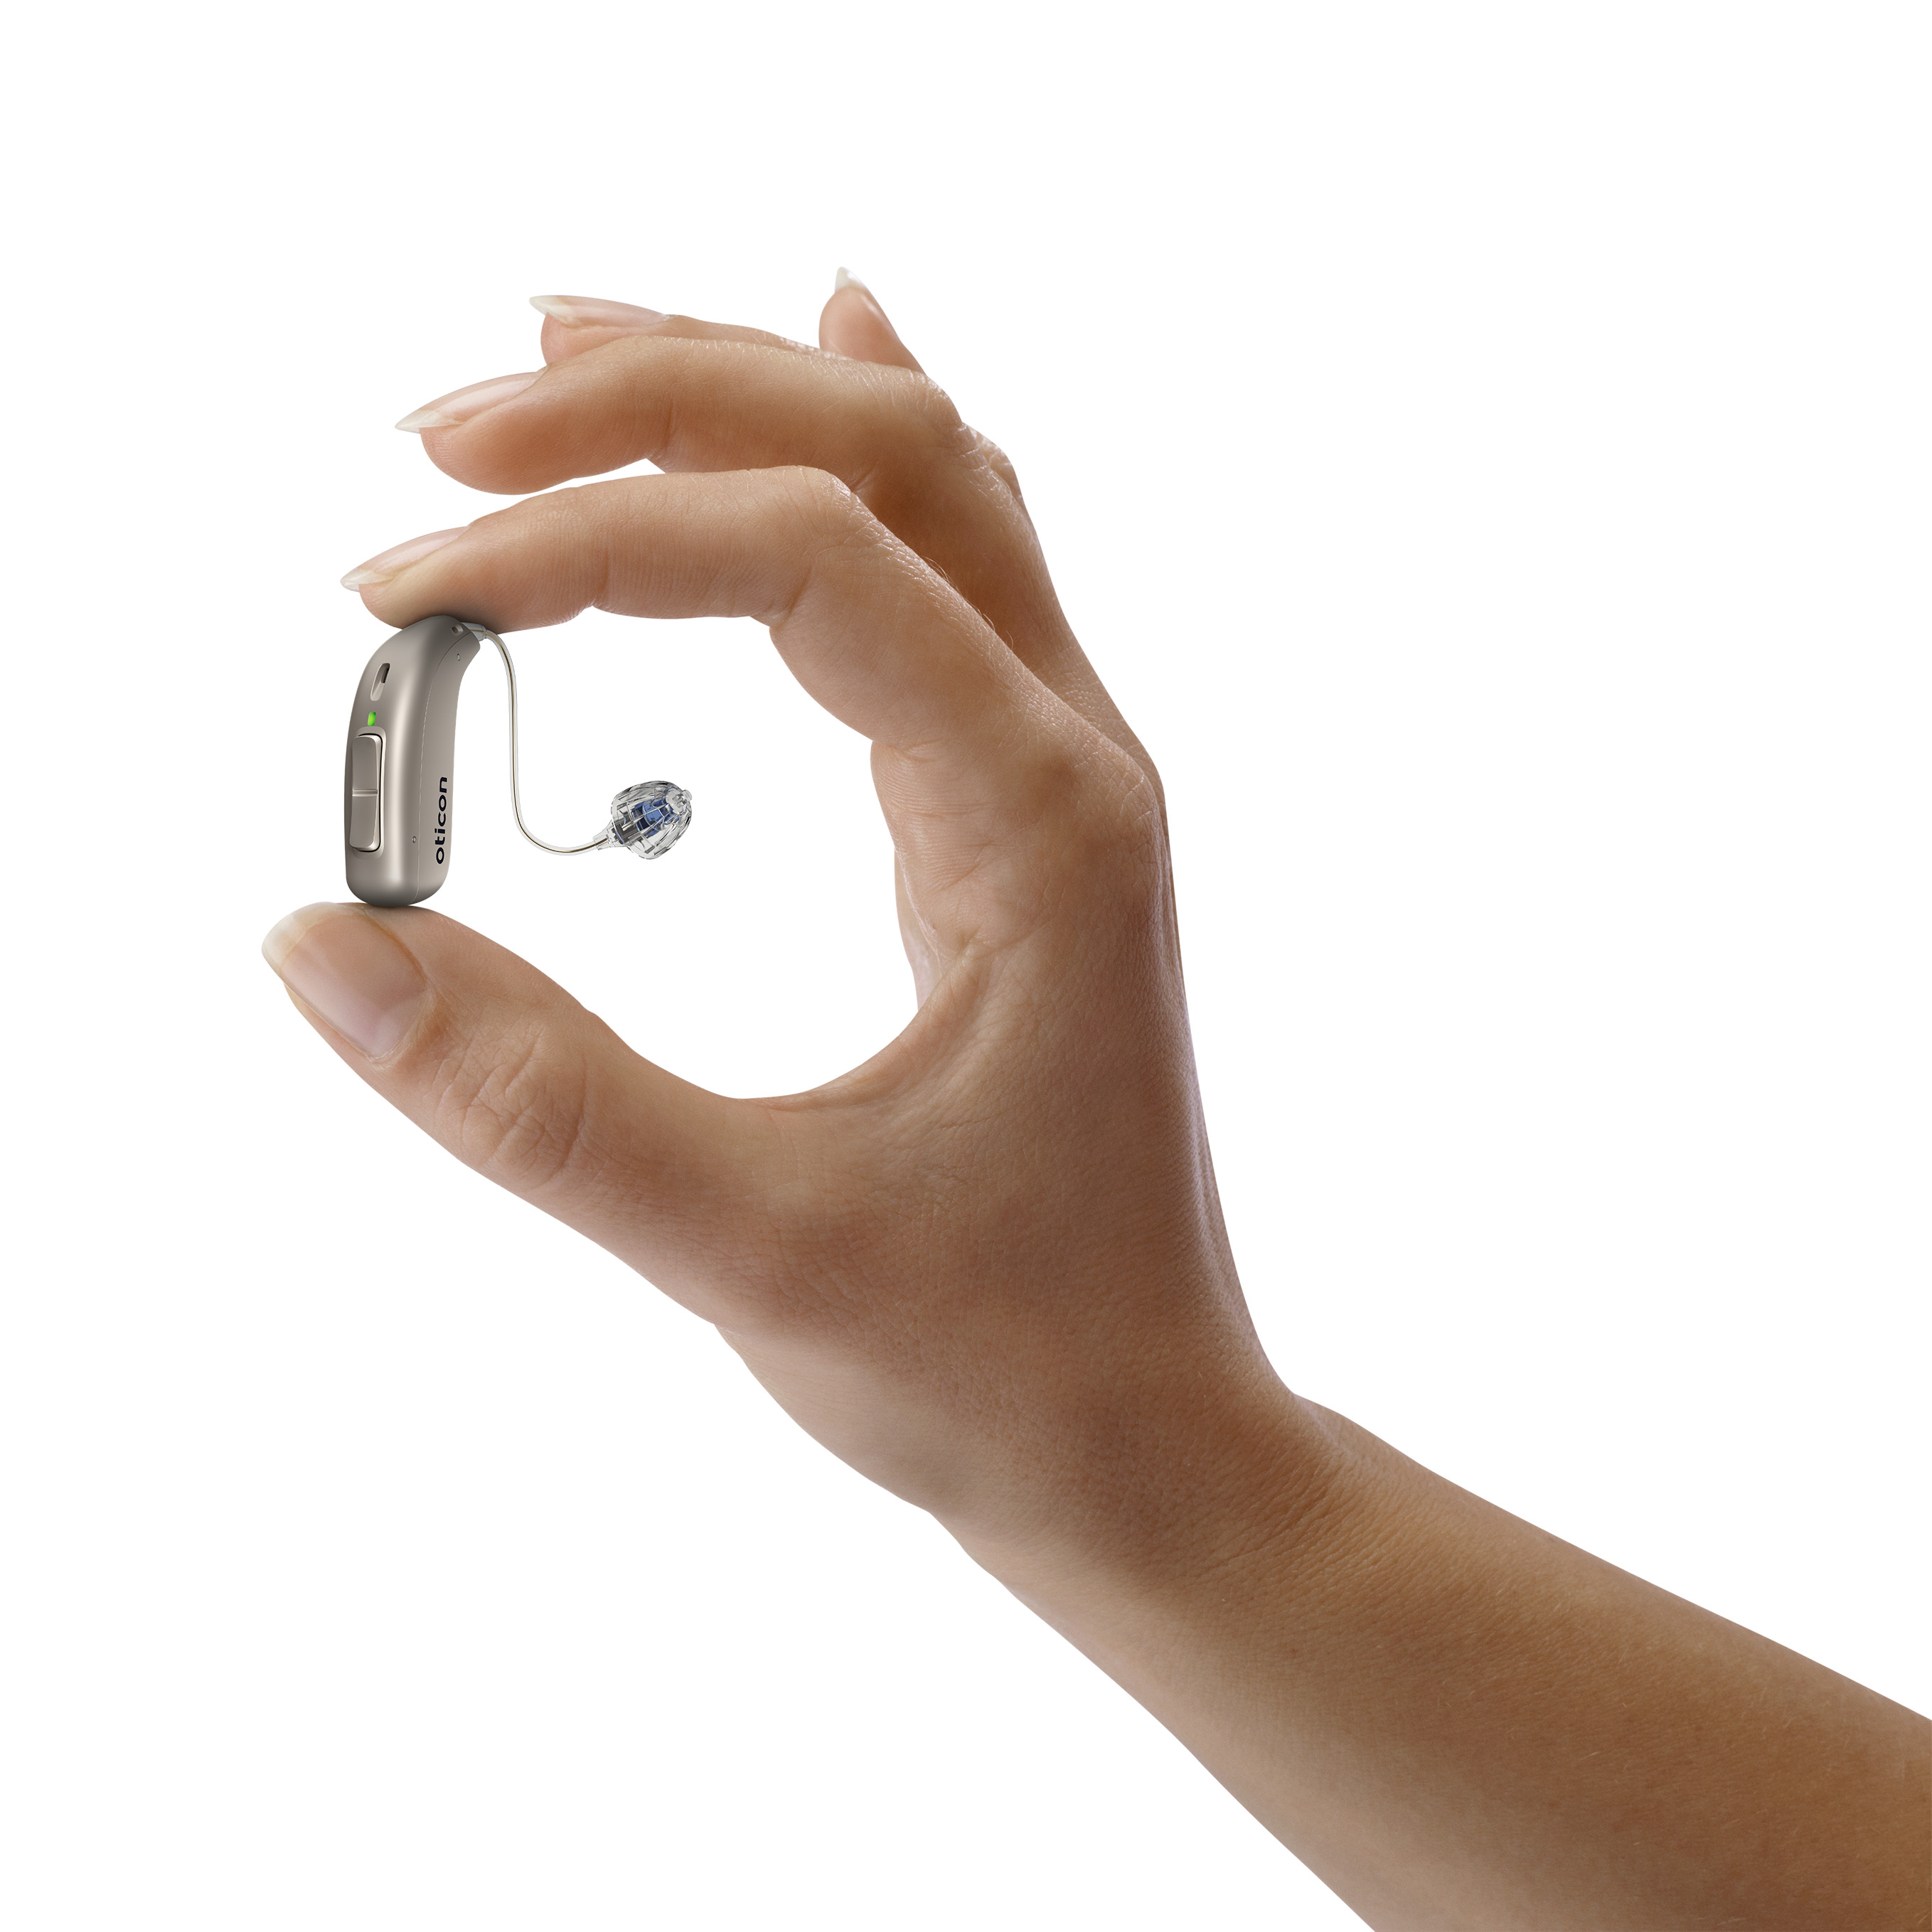 A hand holding a hearing aid